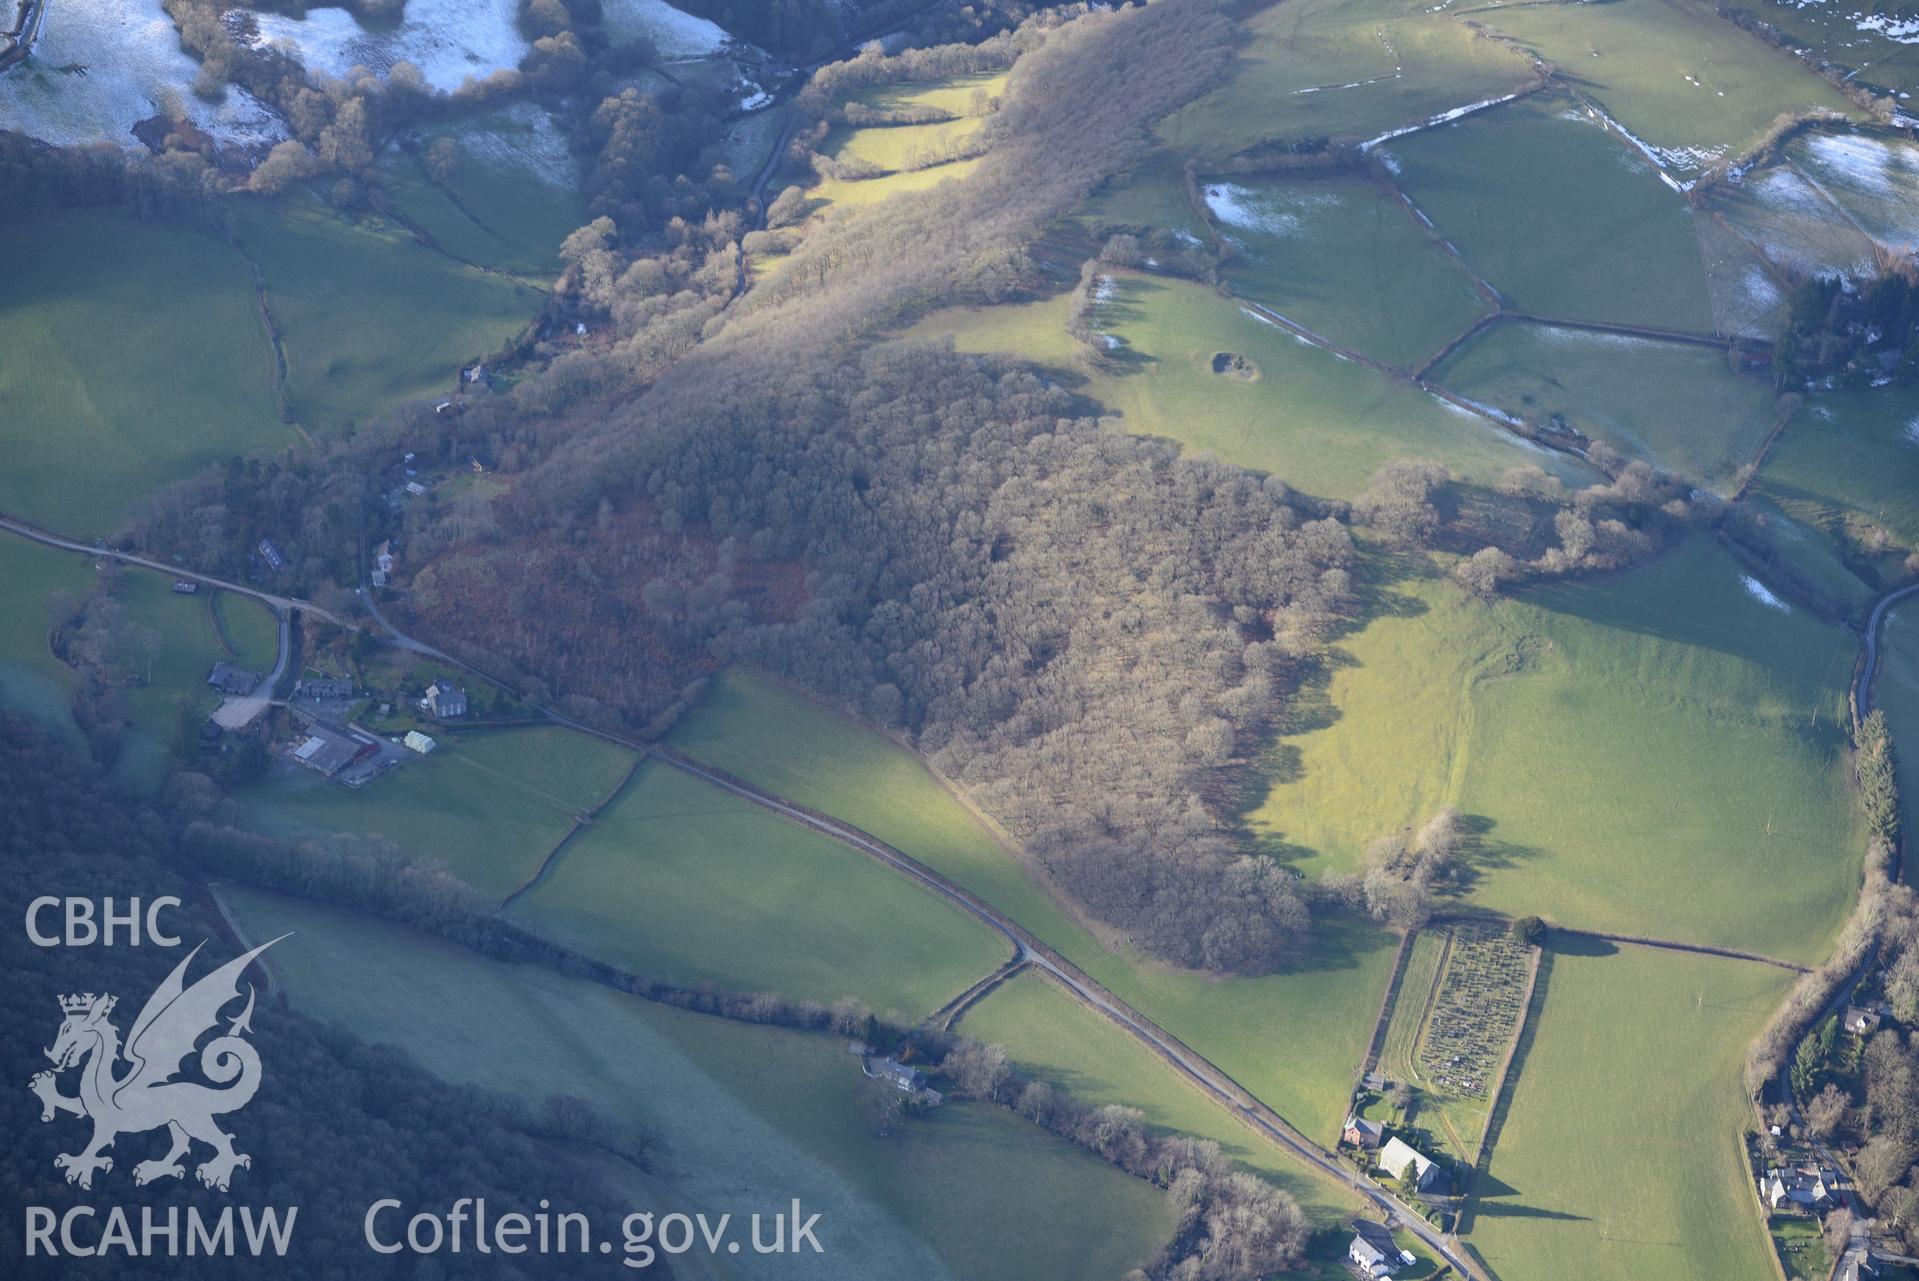 Llawr-y-Glyn Welsh Calvinistic Methodist chapel and Pandy watermill, Llawr-y-Glyn, north of Llanidloes. Oblique aerial photograph taken during the Royal Commission's programme of archaeological aerial reconnaissance by Toby Driver on 4th February 2015.